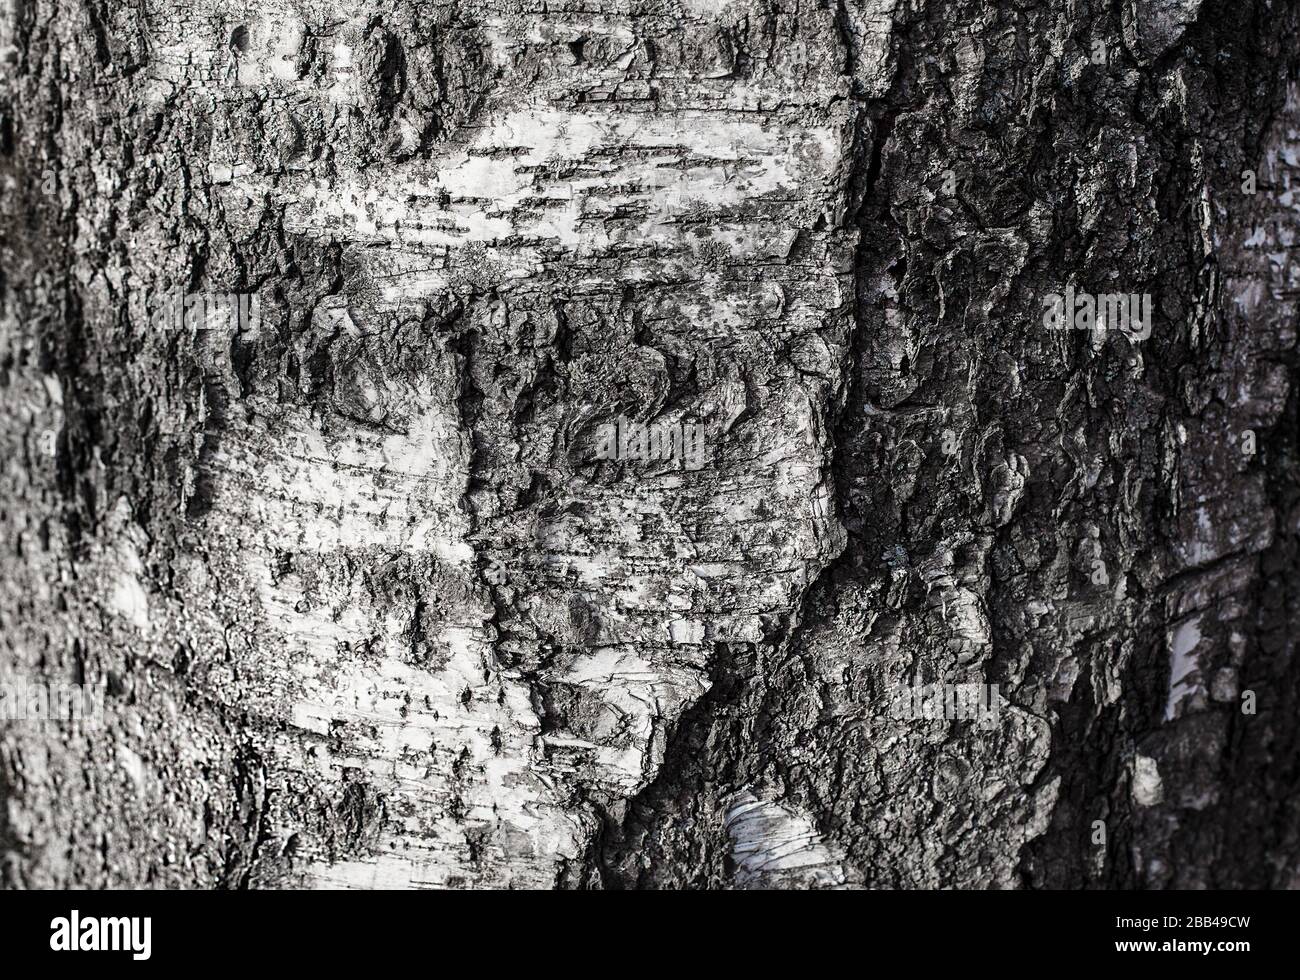 Monochrome birch tree bark texture. Abstract natural black and white background. Bark close up Stock Photo